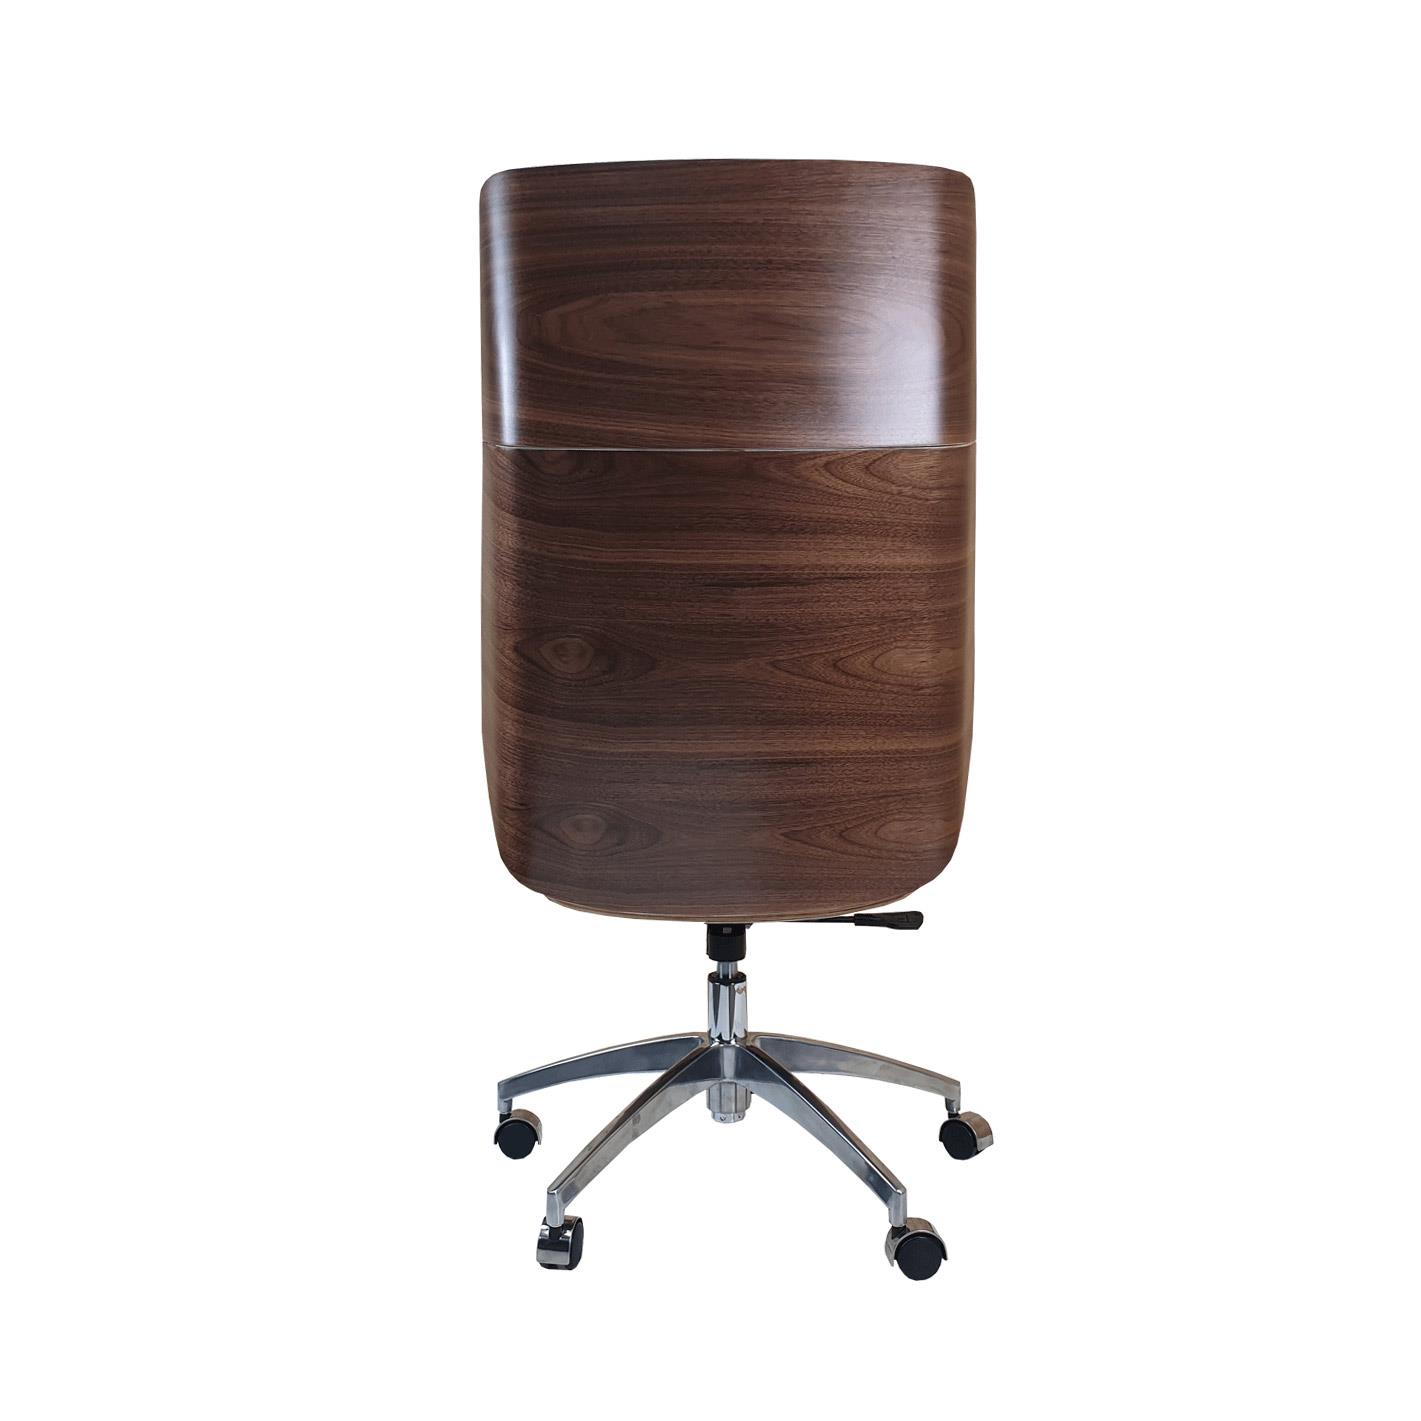 Designer High Back Office Chair Walnut, Wood And Leather Desk Chair Uk